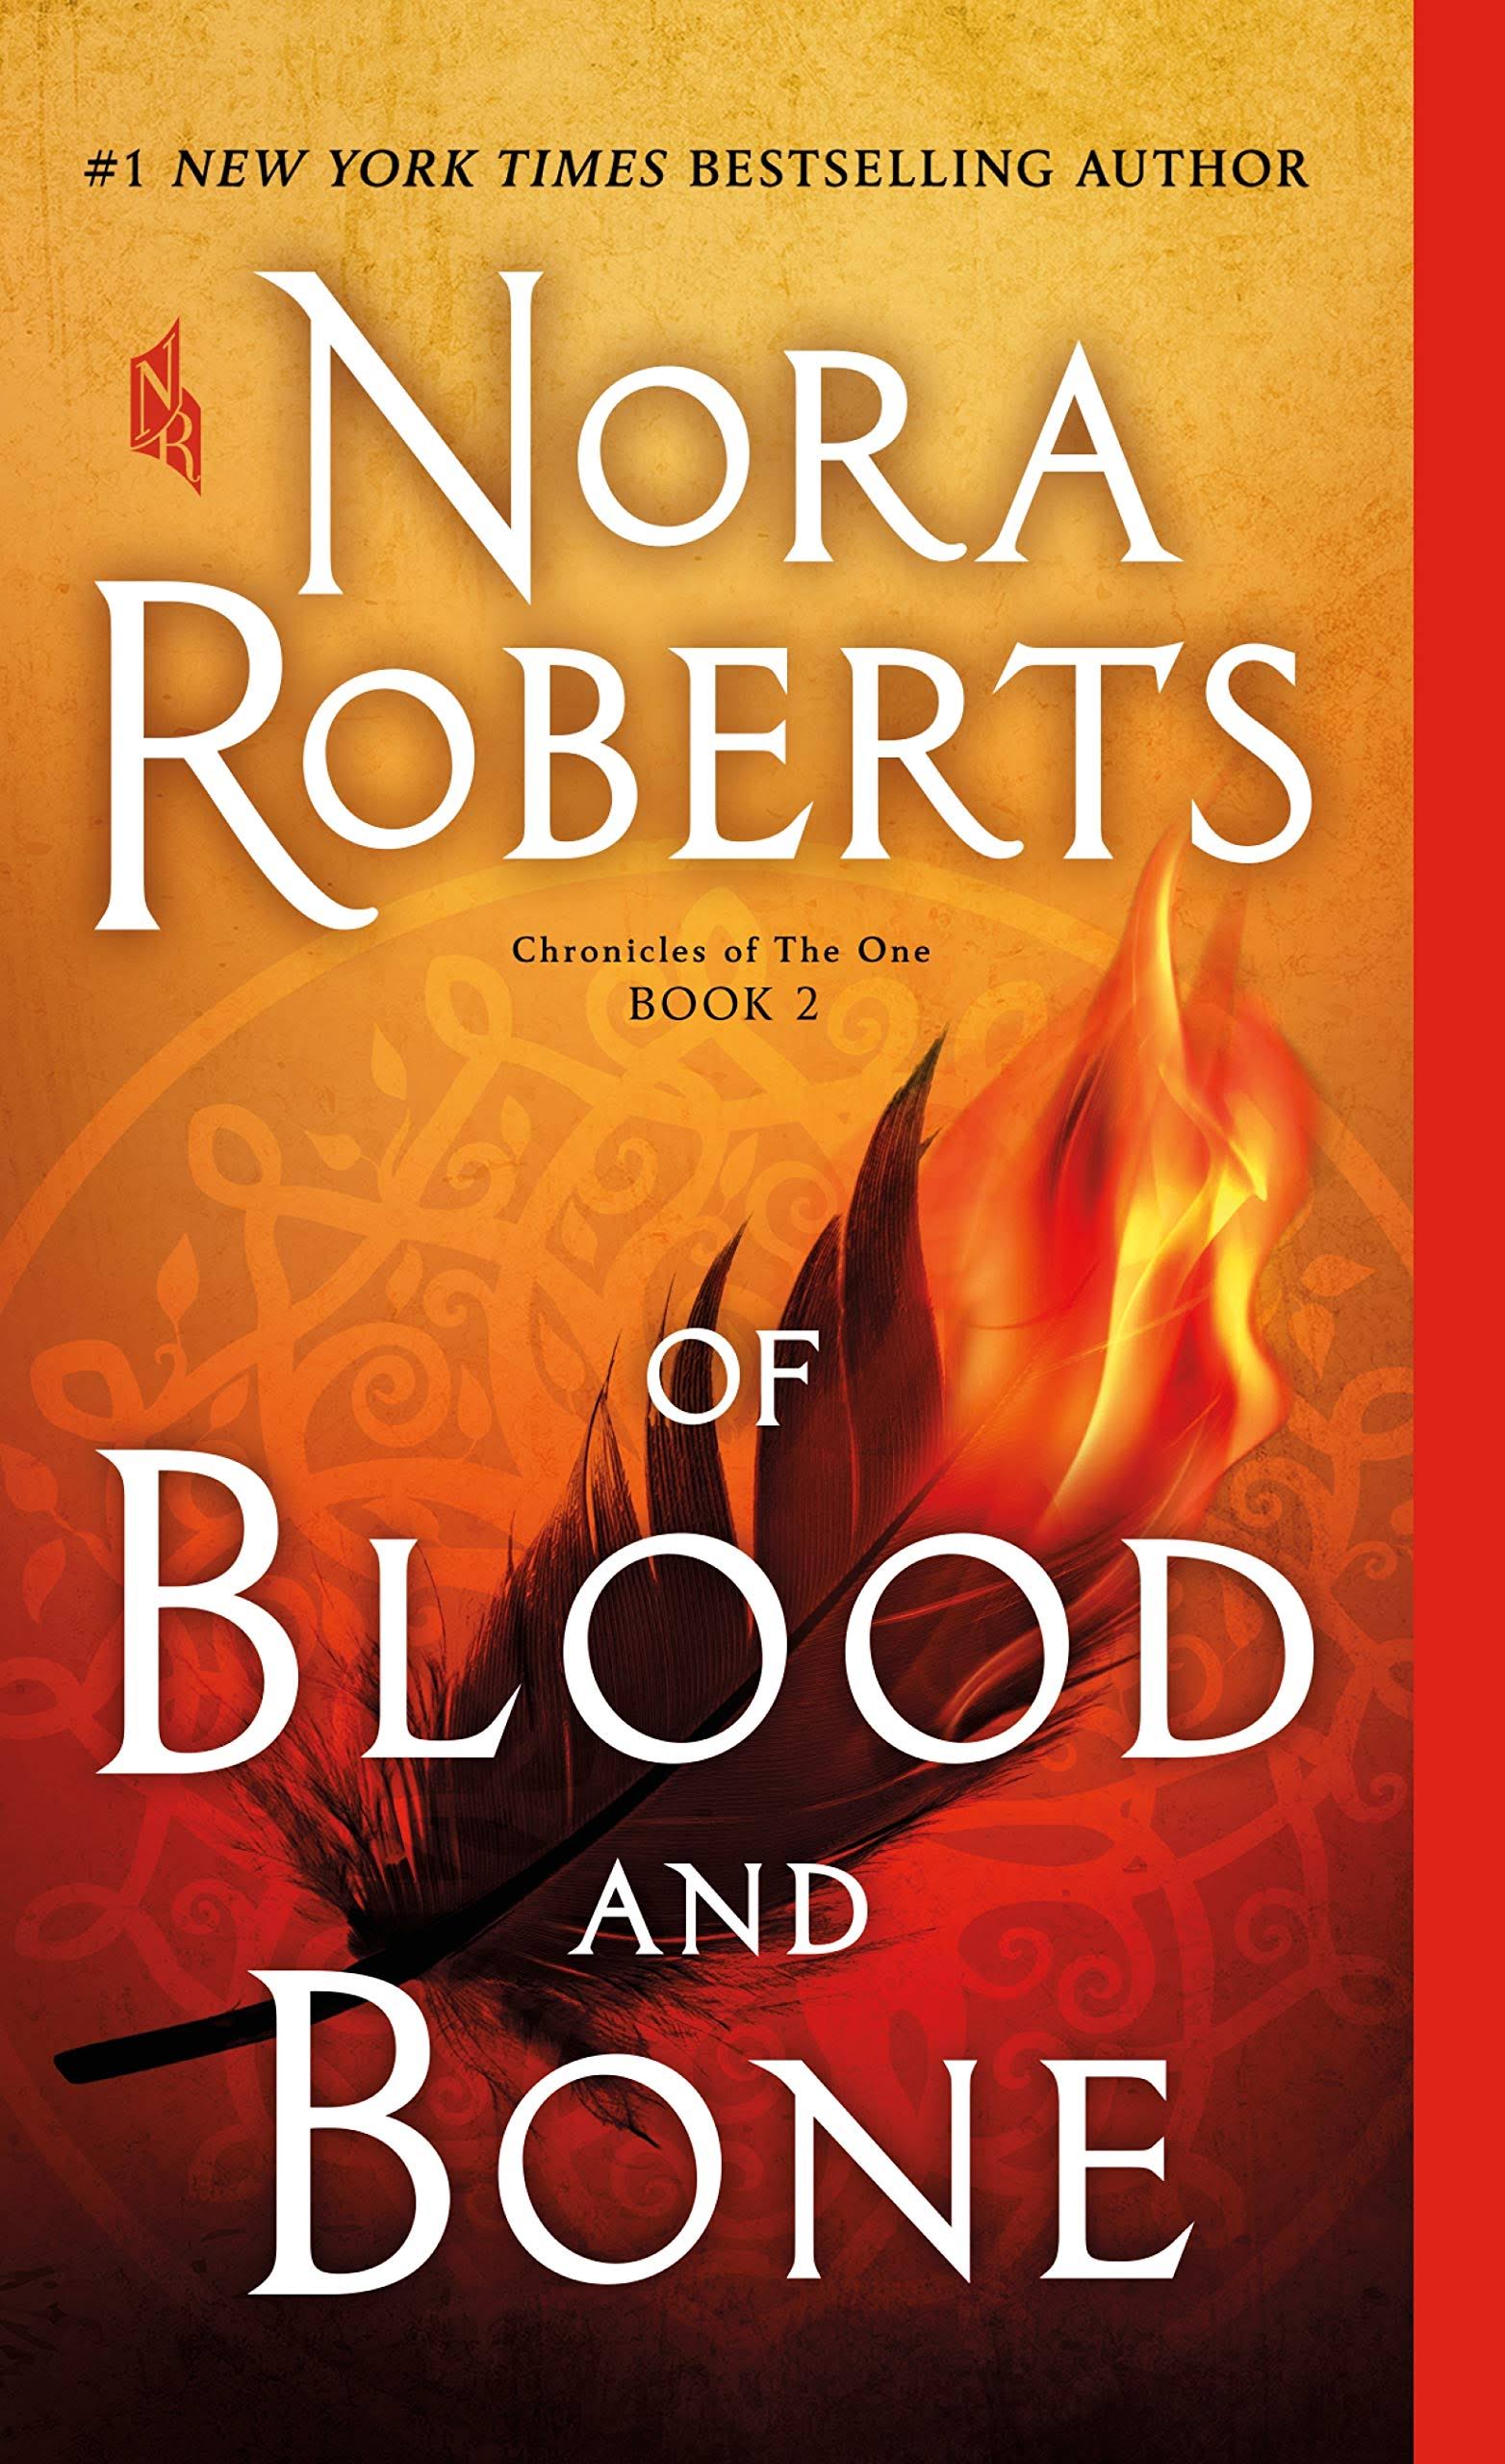 Of Blood and Bone : Chronicles of the One, Book 2 by Nora Roberts - Used (Good) - 1250123011